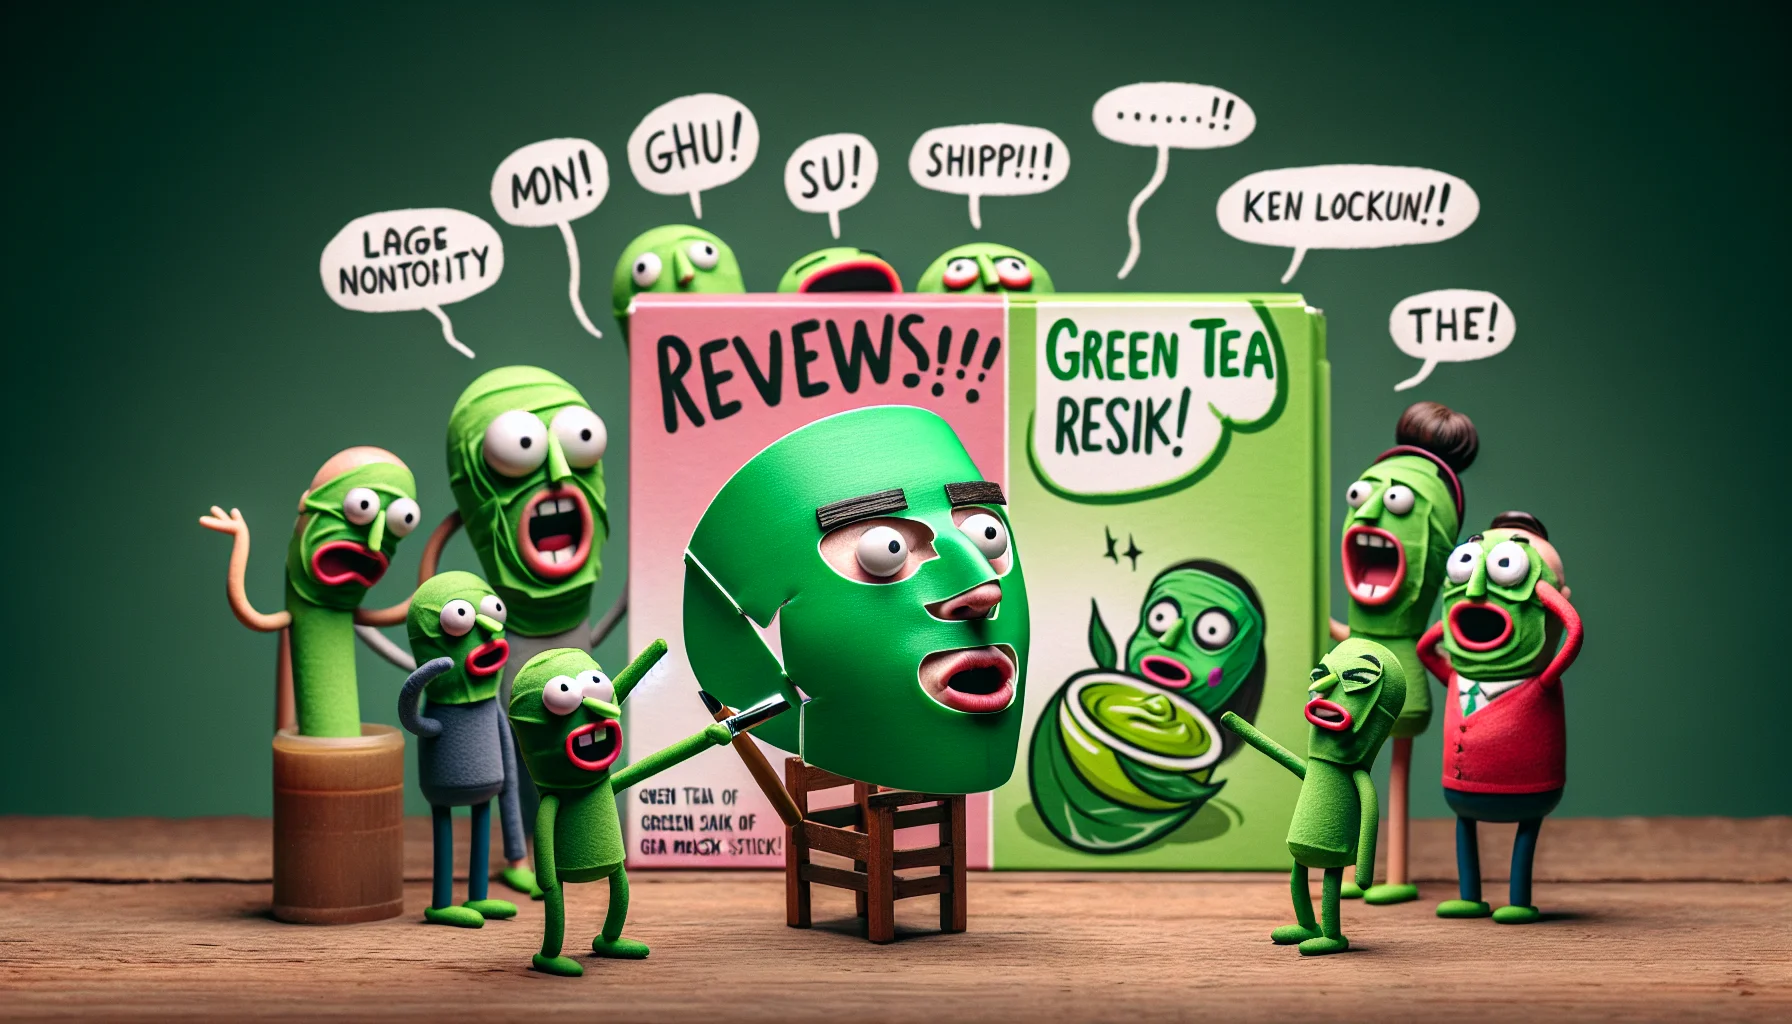 Craft an amusing scene that exhibits reviews for a green tea mask stick. Perhaps a variety of facial expressions can be portrayed on stick figure characters, each trying out the mask, showcasing both surprise and delight. Emphasise the vivid green colour of the mask stick and perhaps include a large novelty-sized version for comedic effect. Encourage the viewer to engage with the humour and jovial atmosphere of the image as this could make the product seem more appealing. Remember to keep the tone light and playful to mirror the fun nature of the scenario.